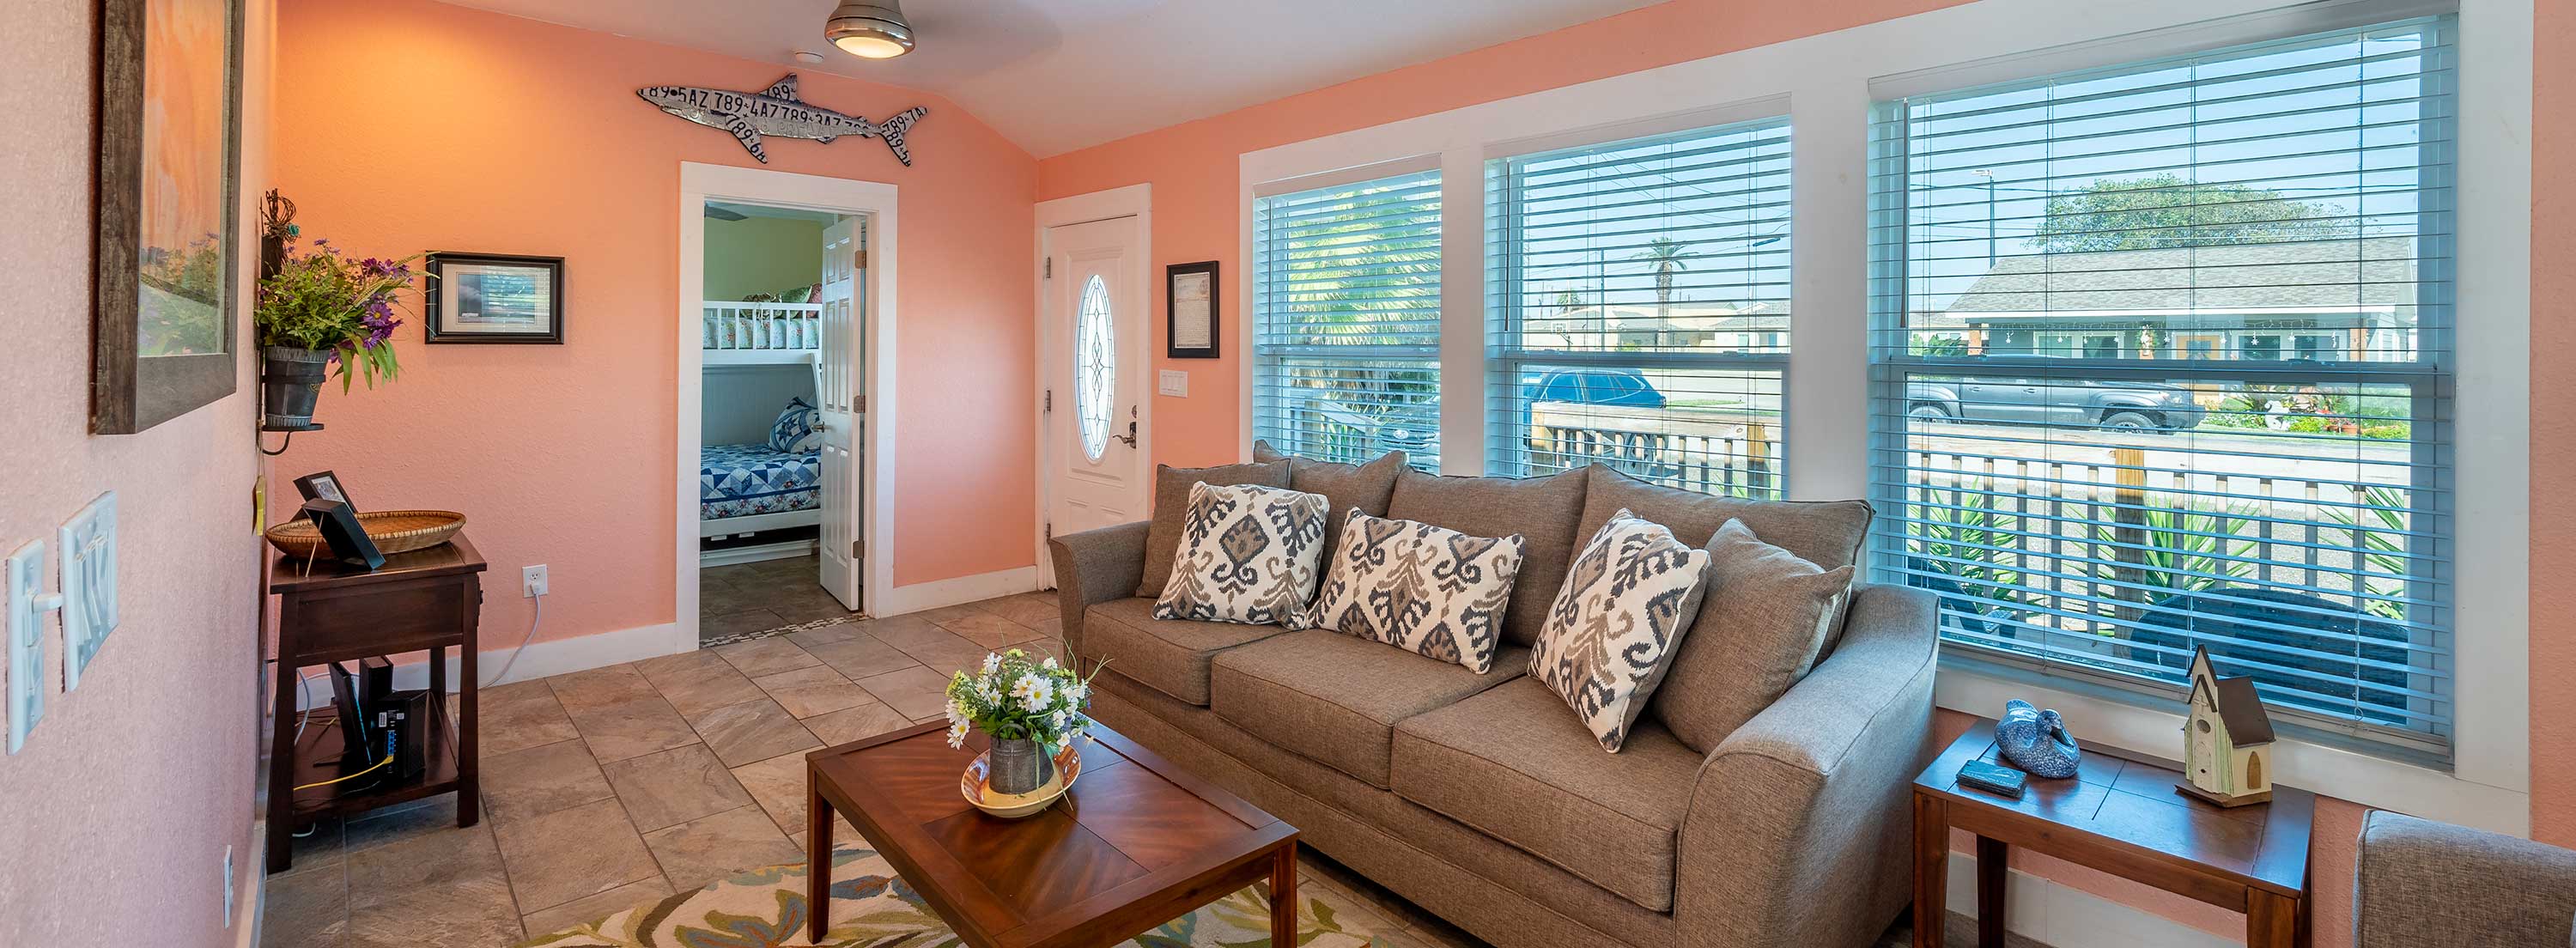 Come and stay at Once upon a Tide in Port Aransas